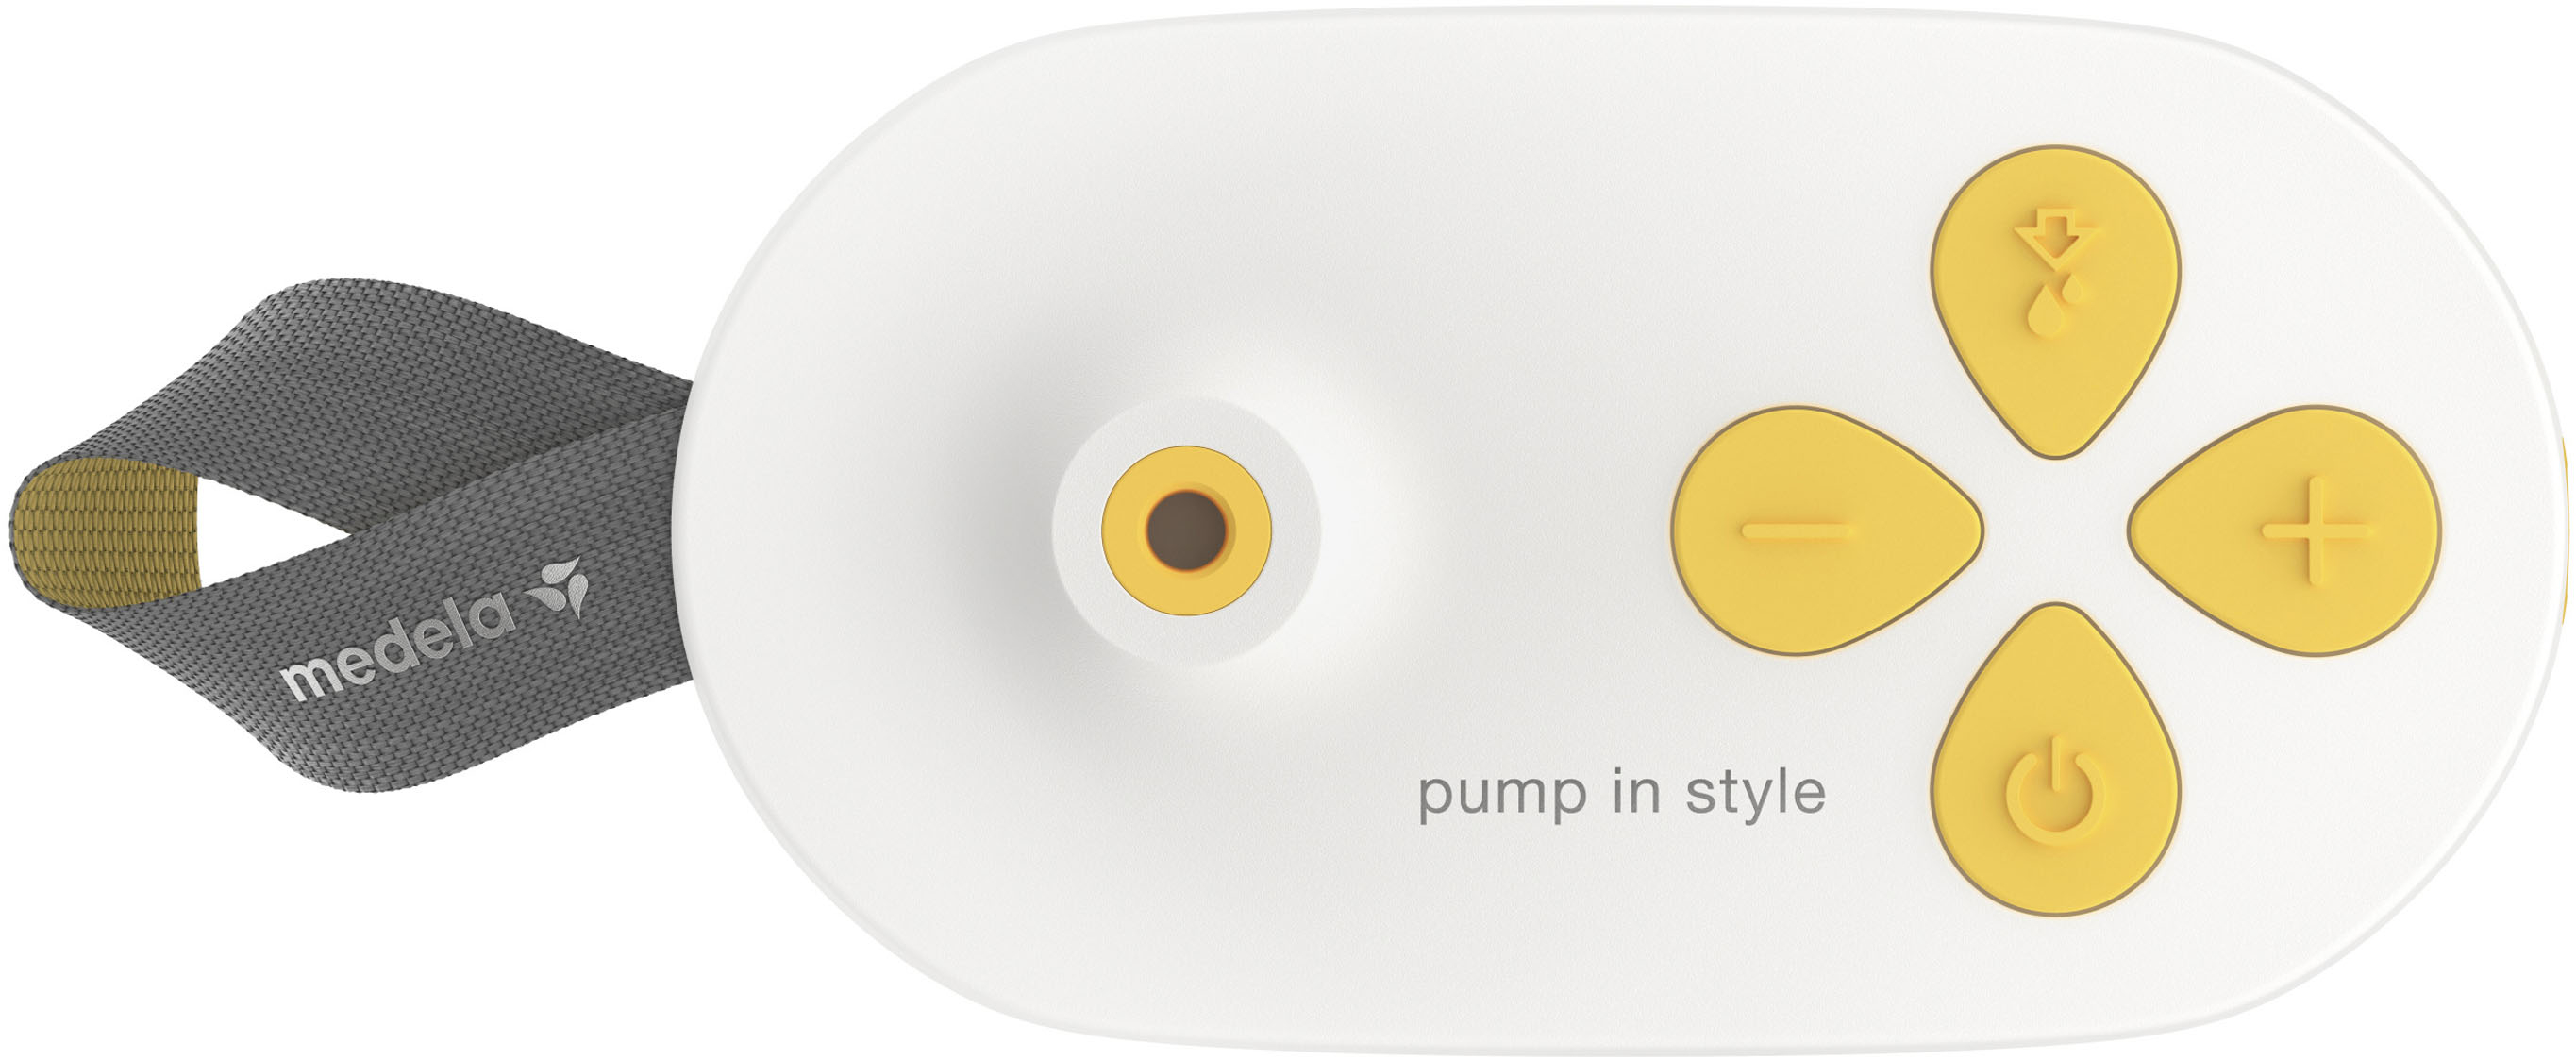 HSA Eligible  Medela Pump In Style Double Electric Breast Pump with Max  Flow Technology